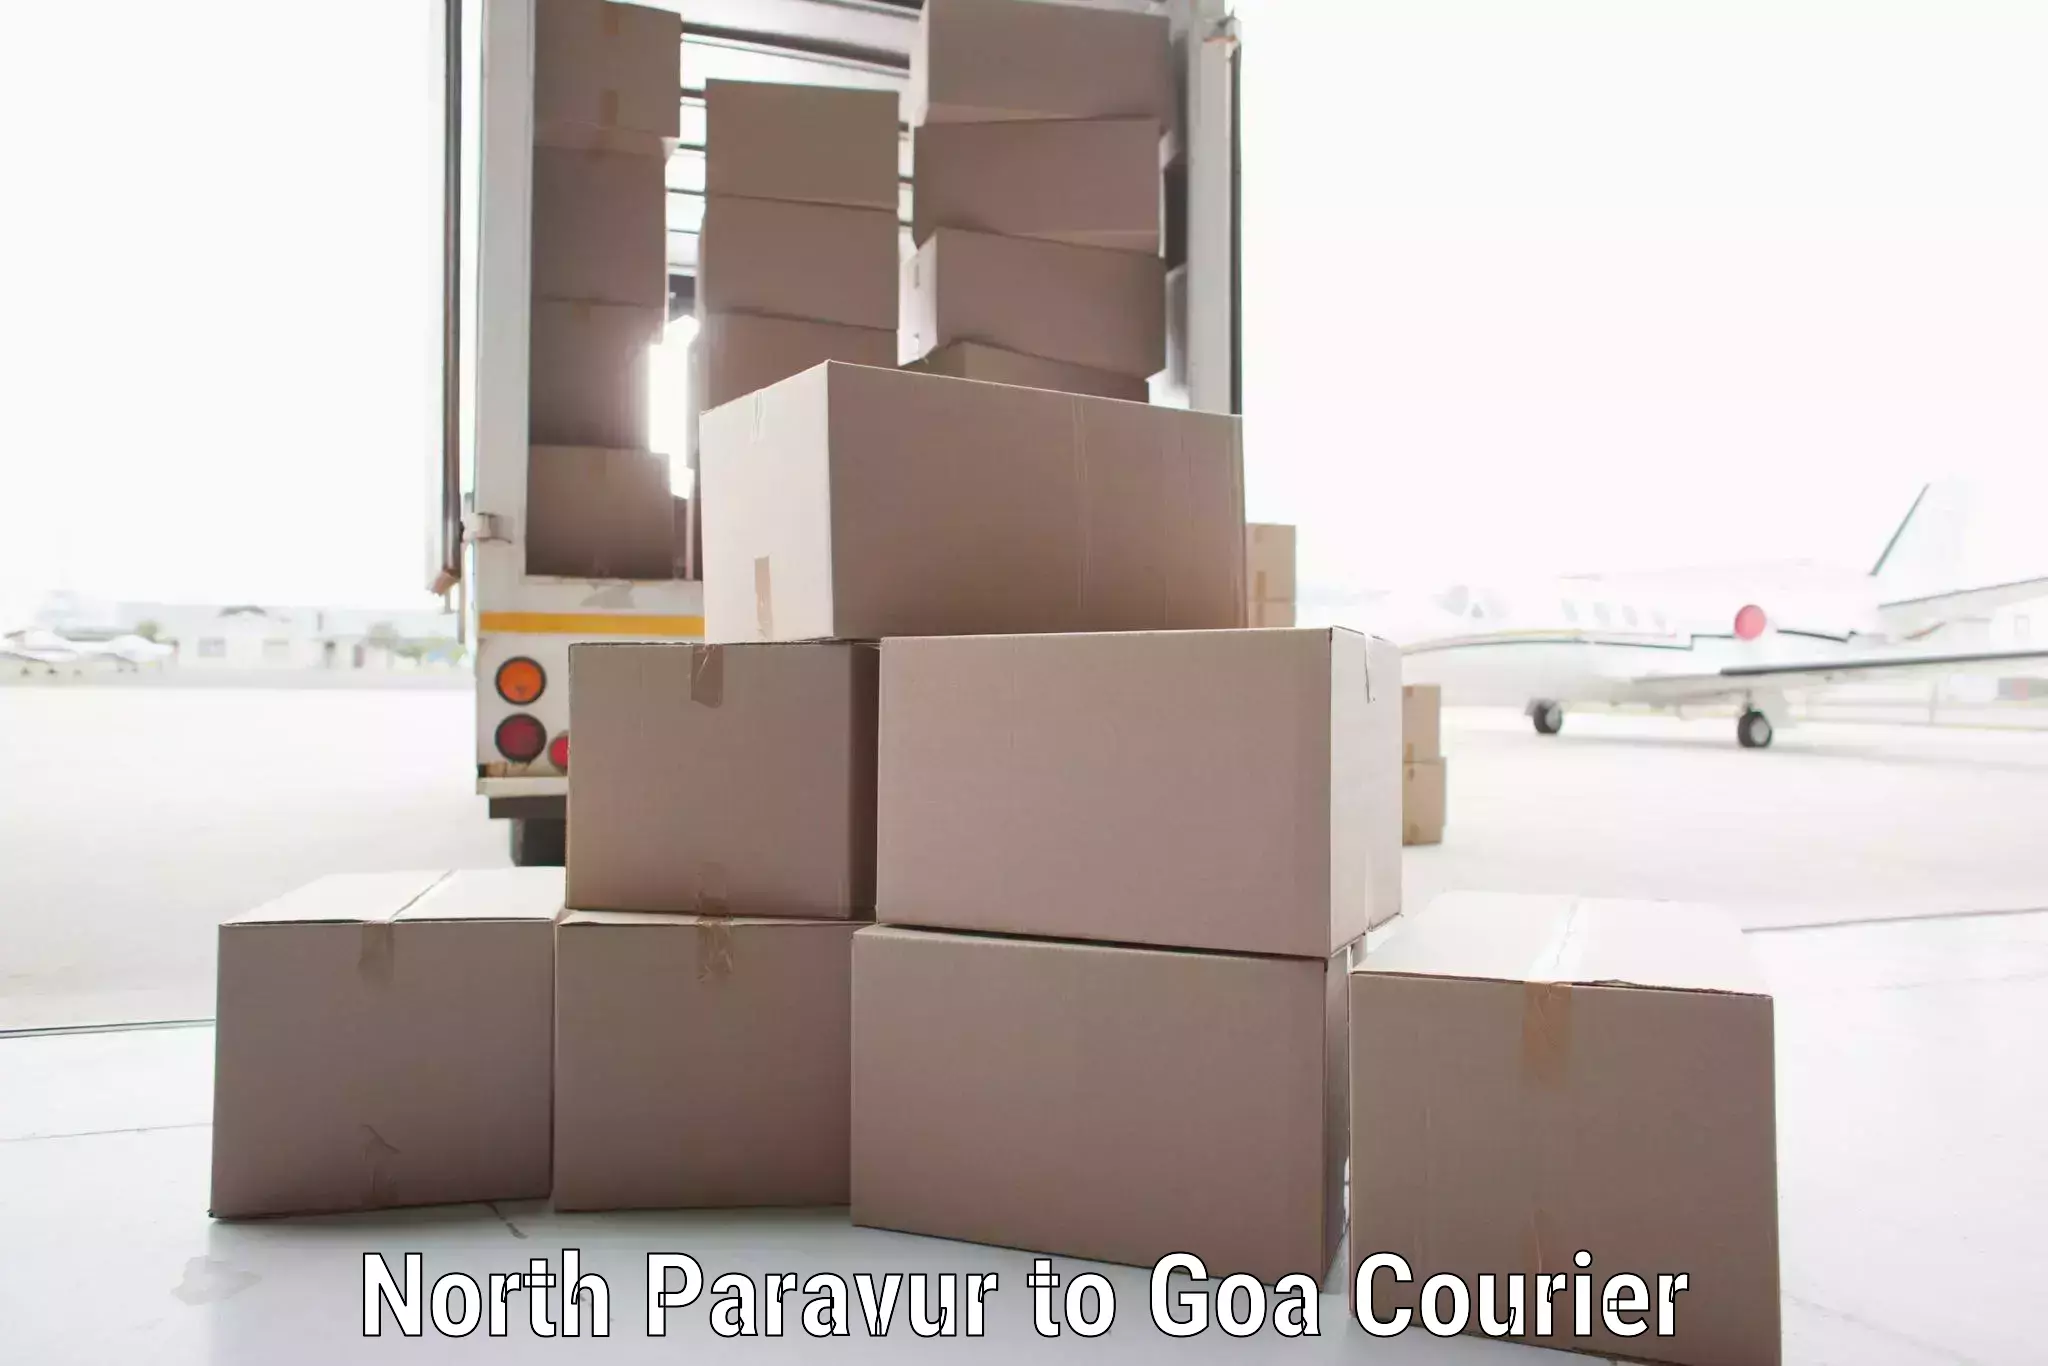 Cost-effective shipping solutions in North Paravur to Vasco da Gama